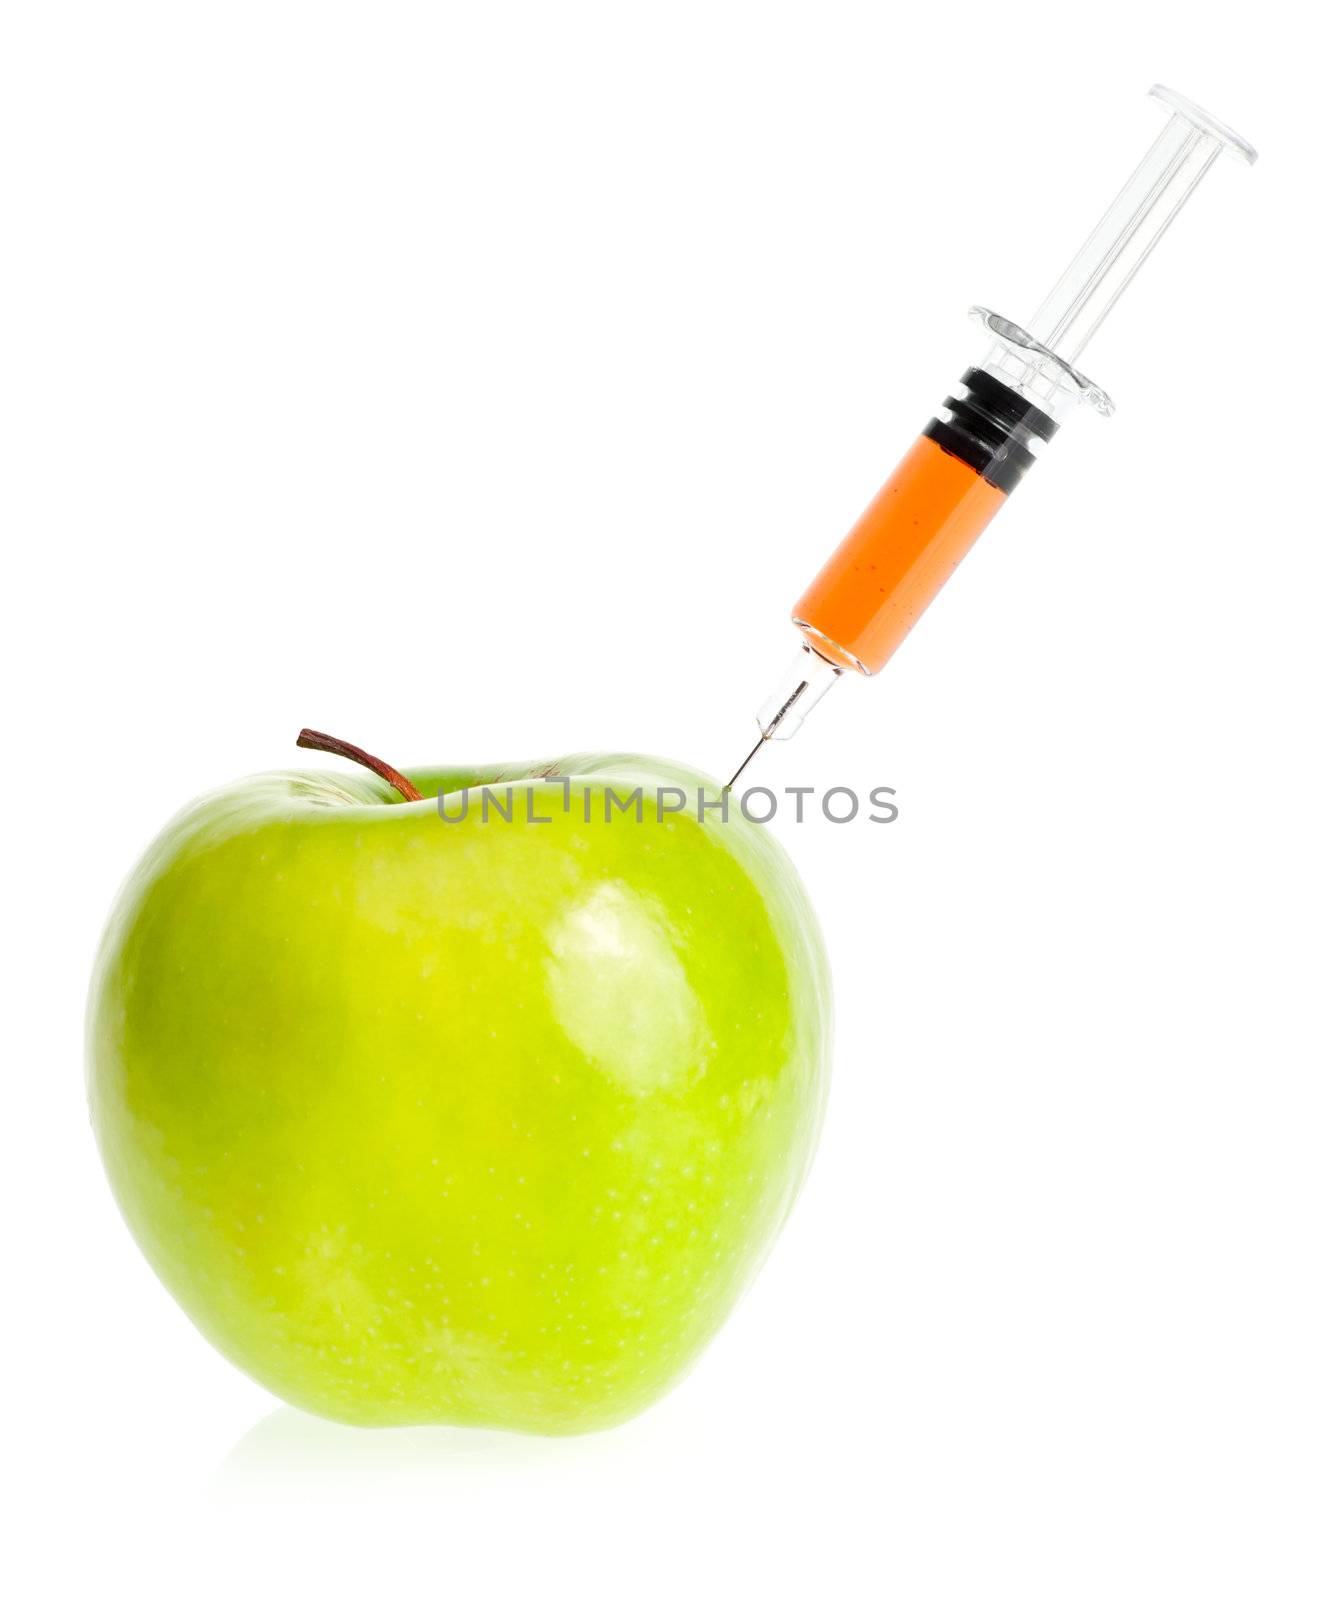 Genetic modification concept with green apple receiving an injection